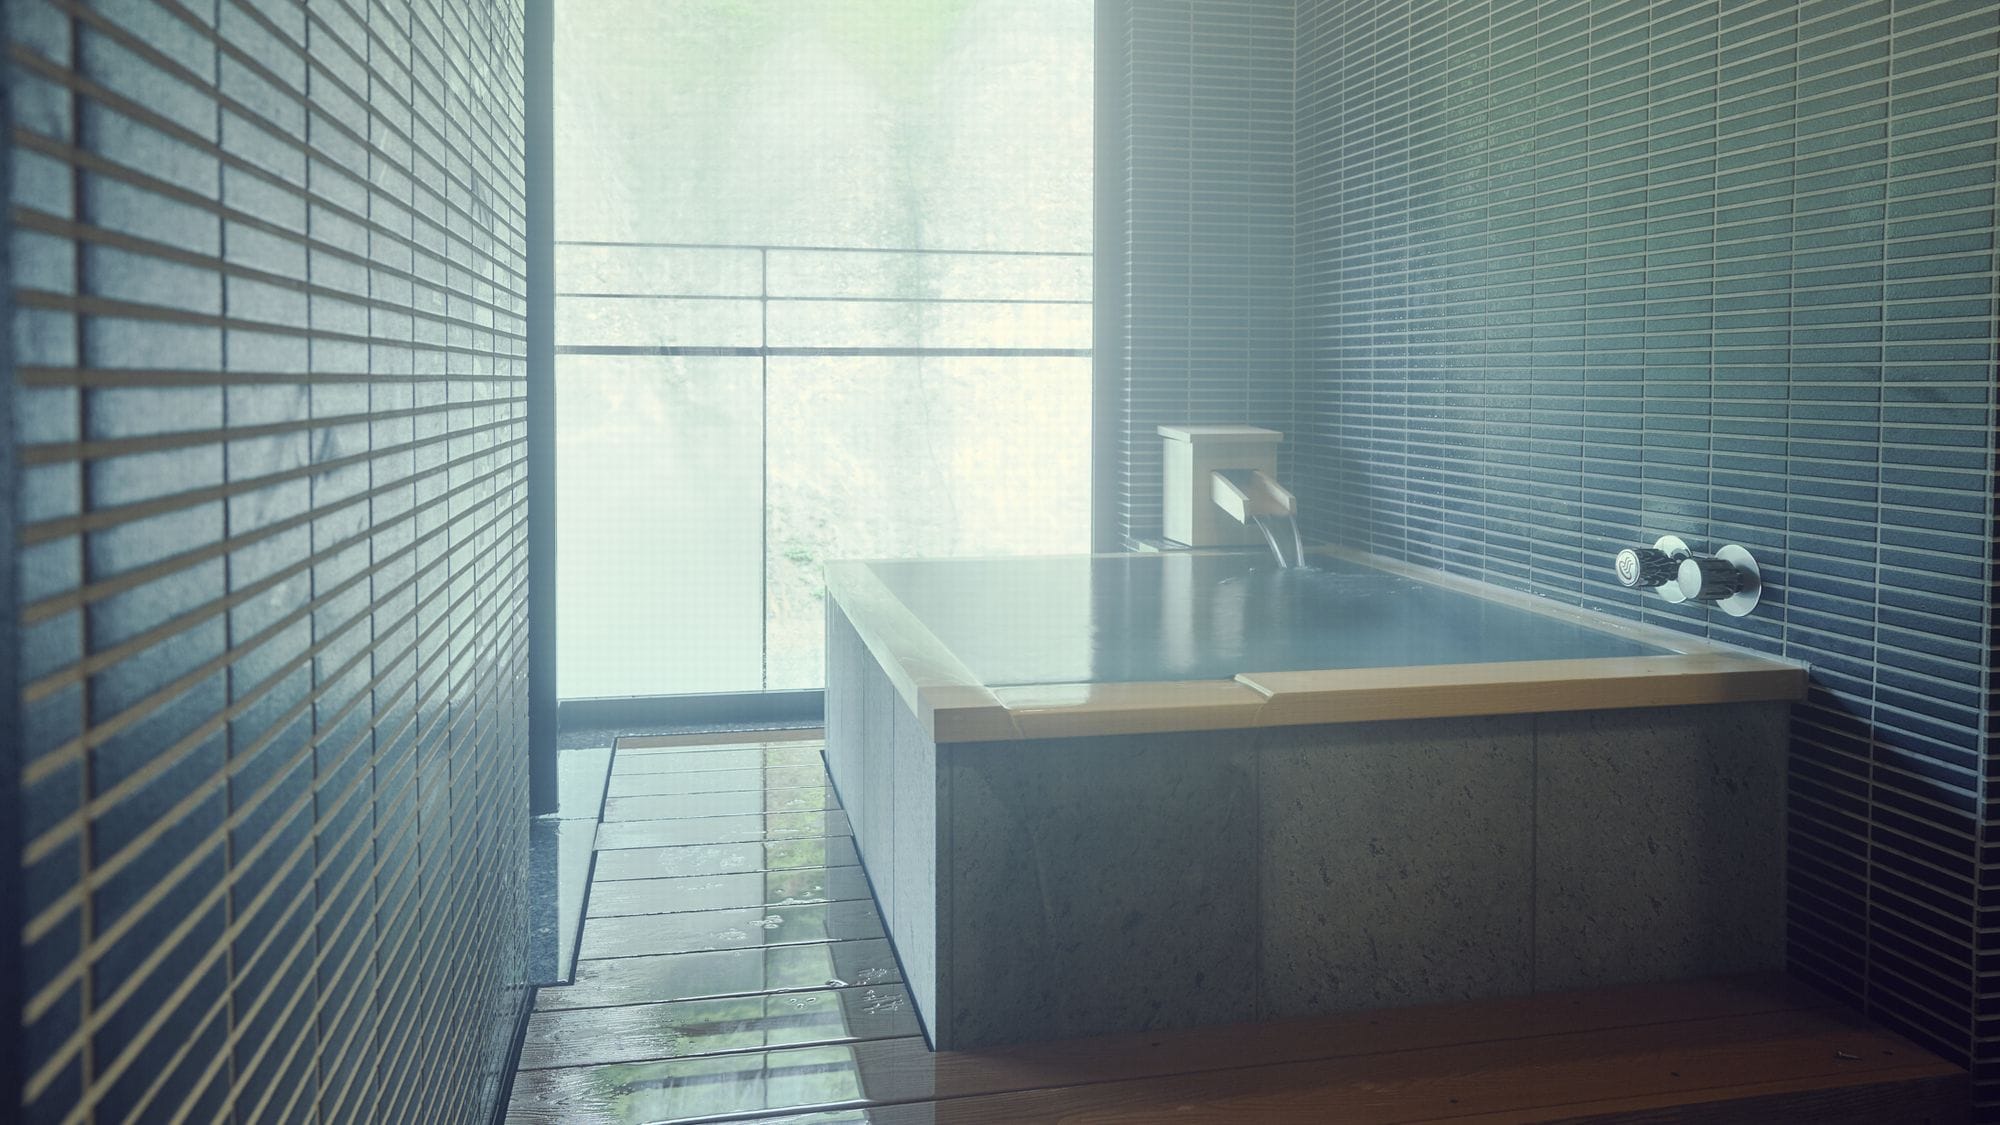 [Shisuitei] Guest room with semi-open-air bath (image)